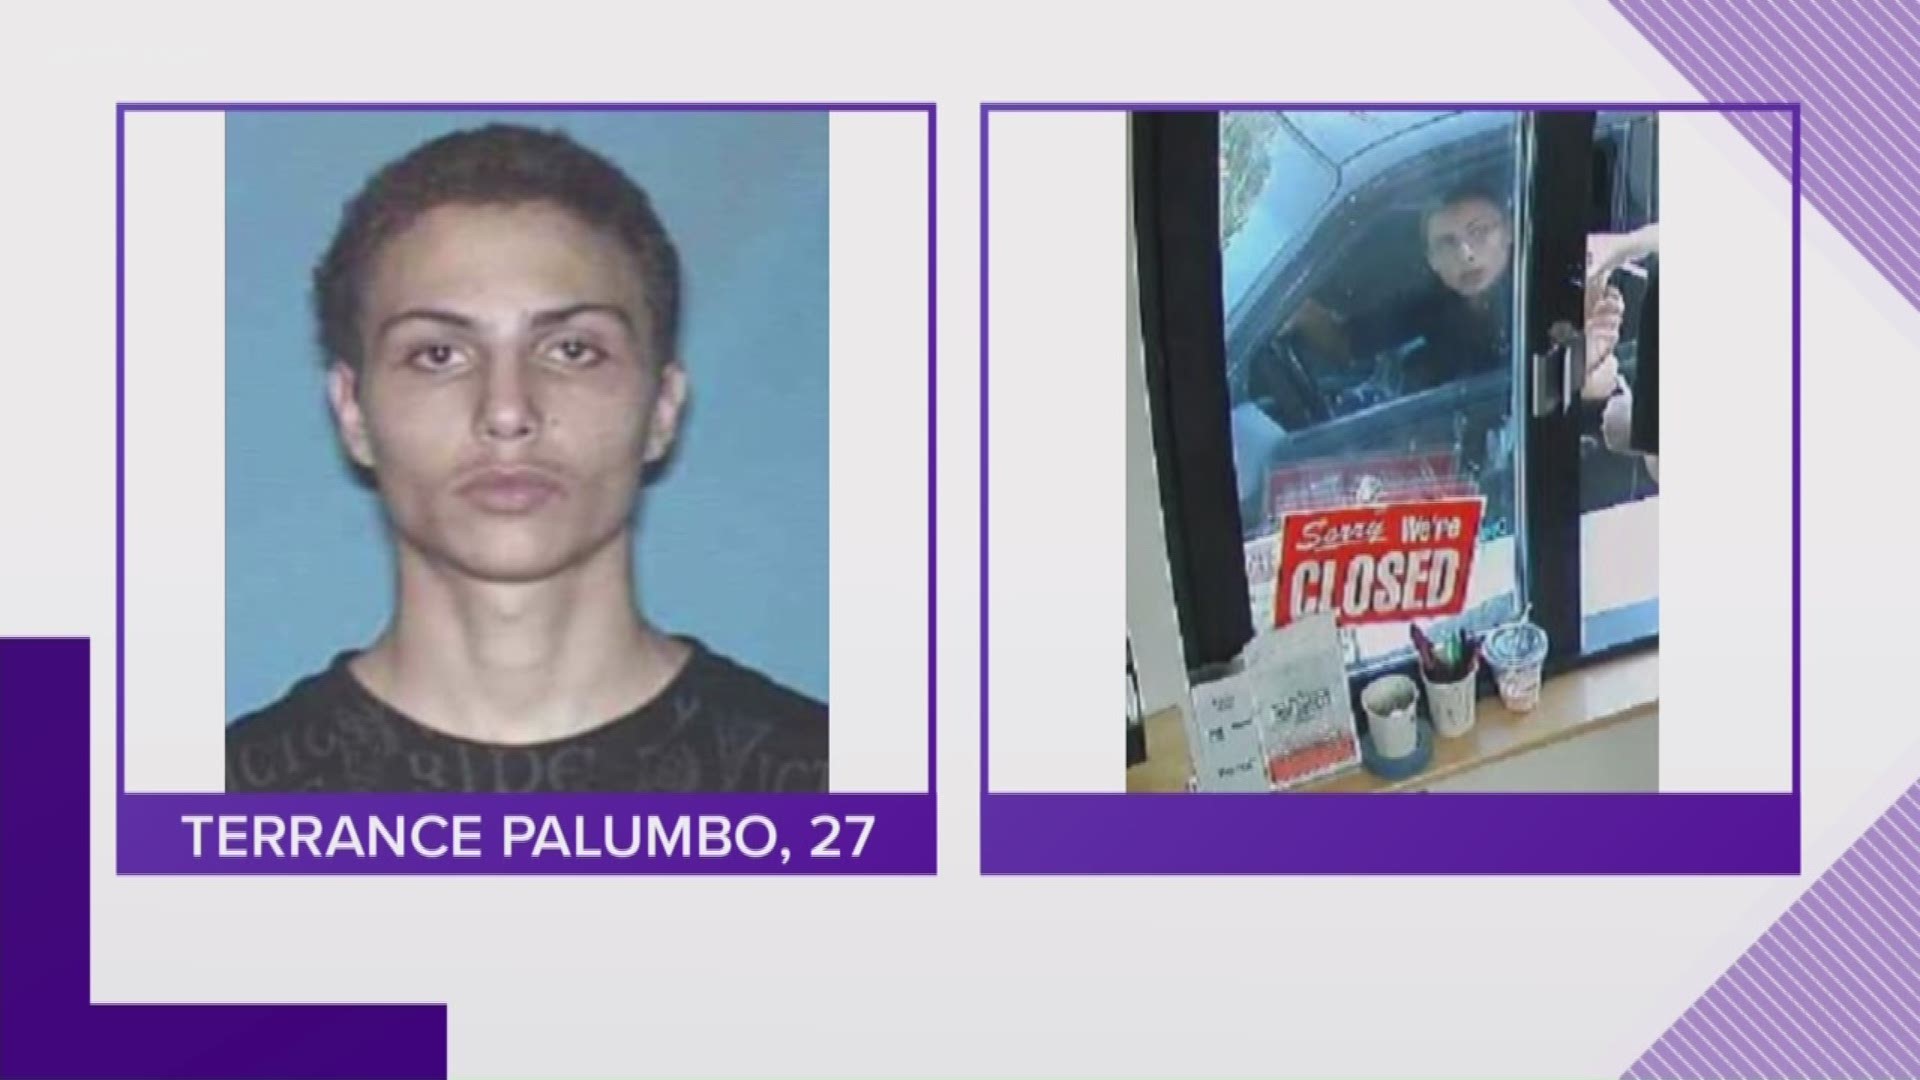 Investigators have identified the suspect as 27-year-old Terrance Palumbo. On July 21st, he reportedly exposed himself while in a restaurant drive-thru on Thousand Oaks. Right now, police know of at least two other incidents that happened within the last